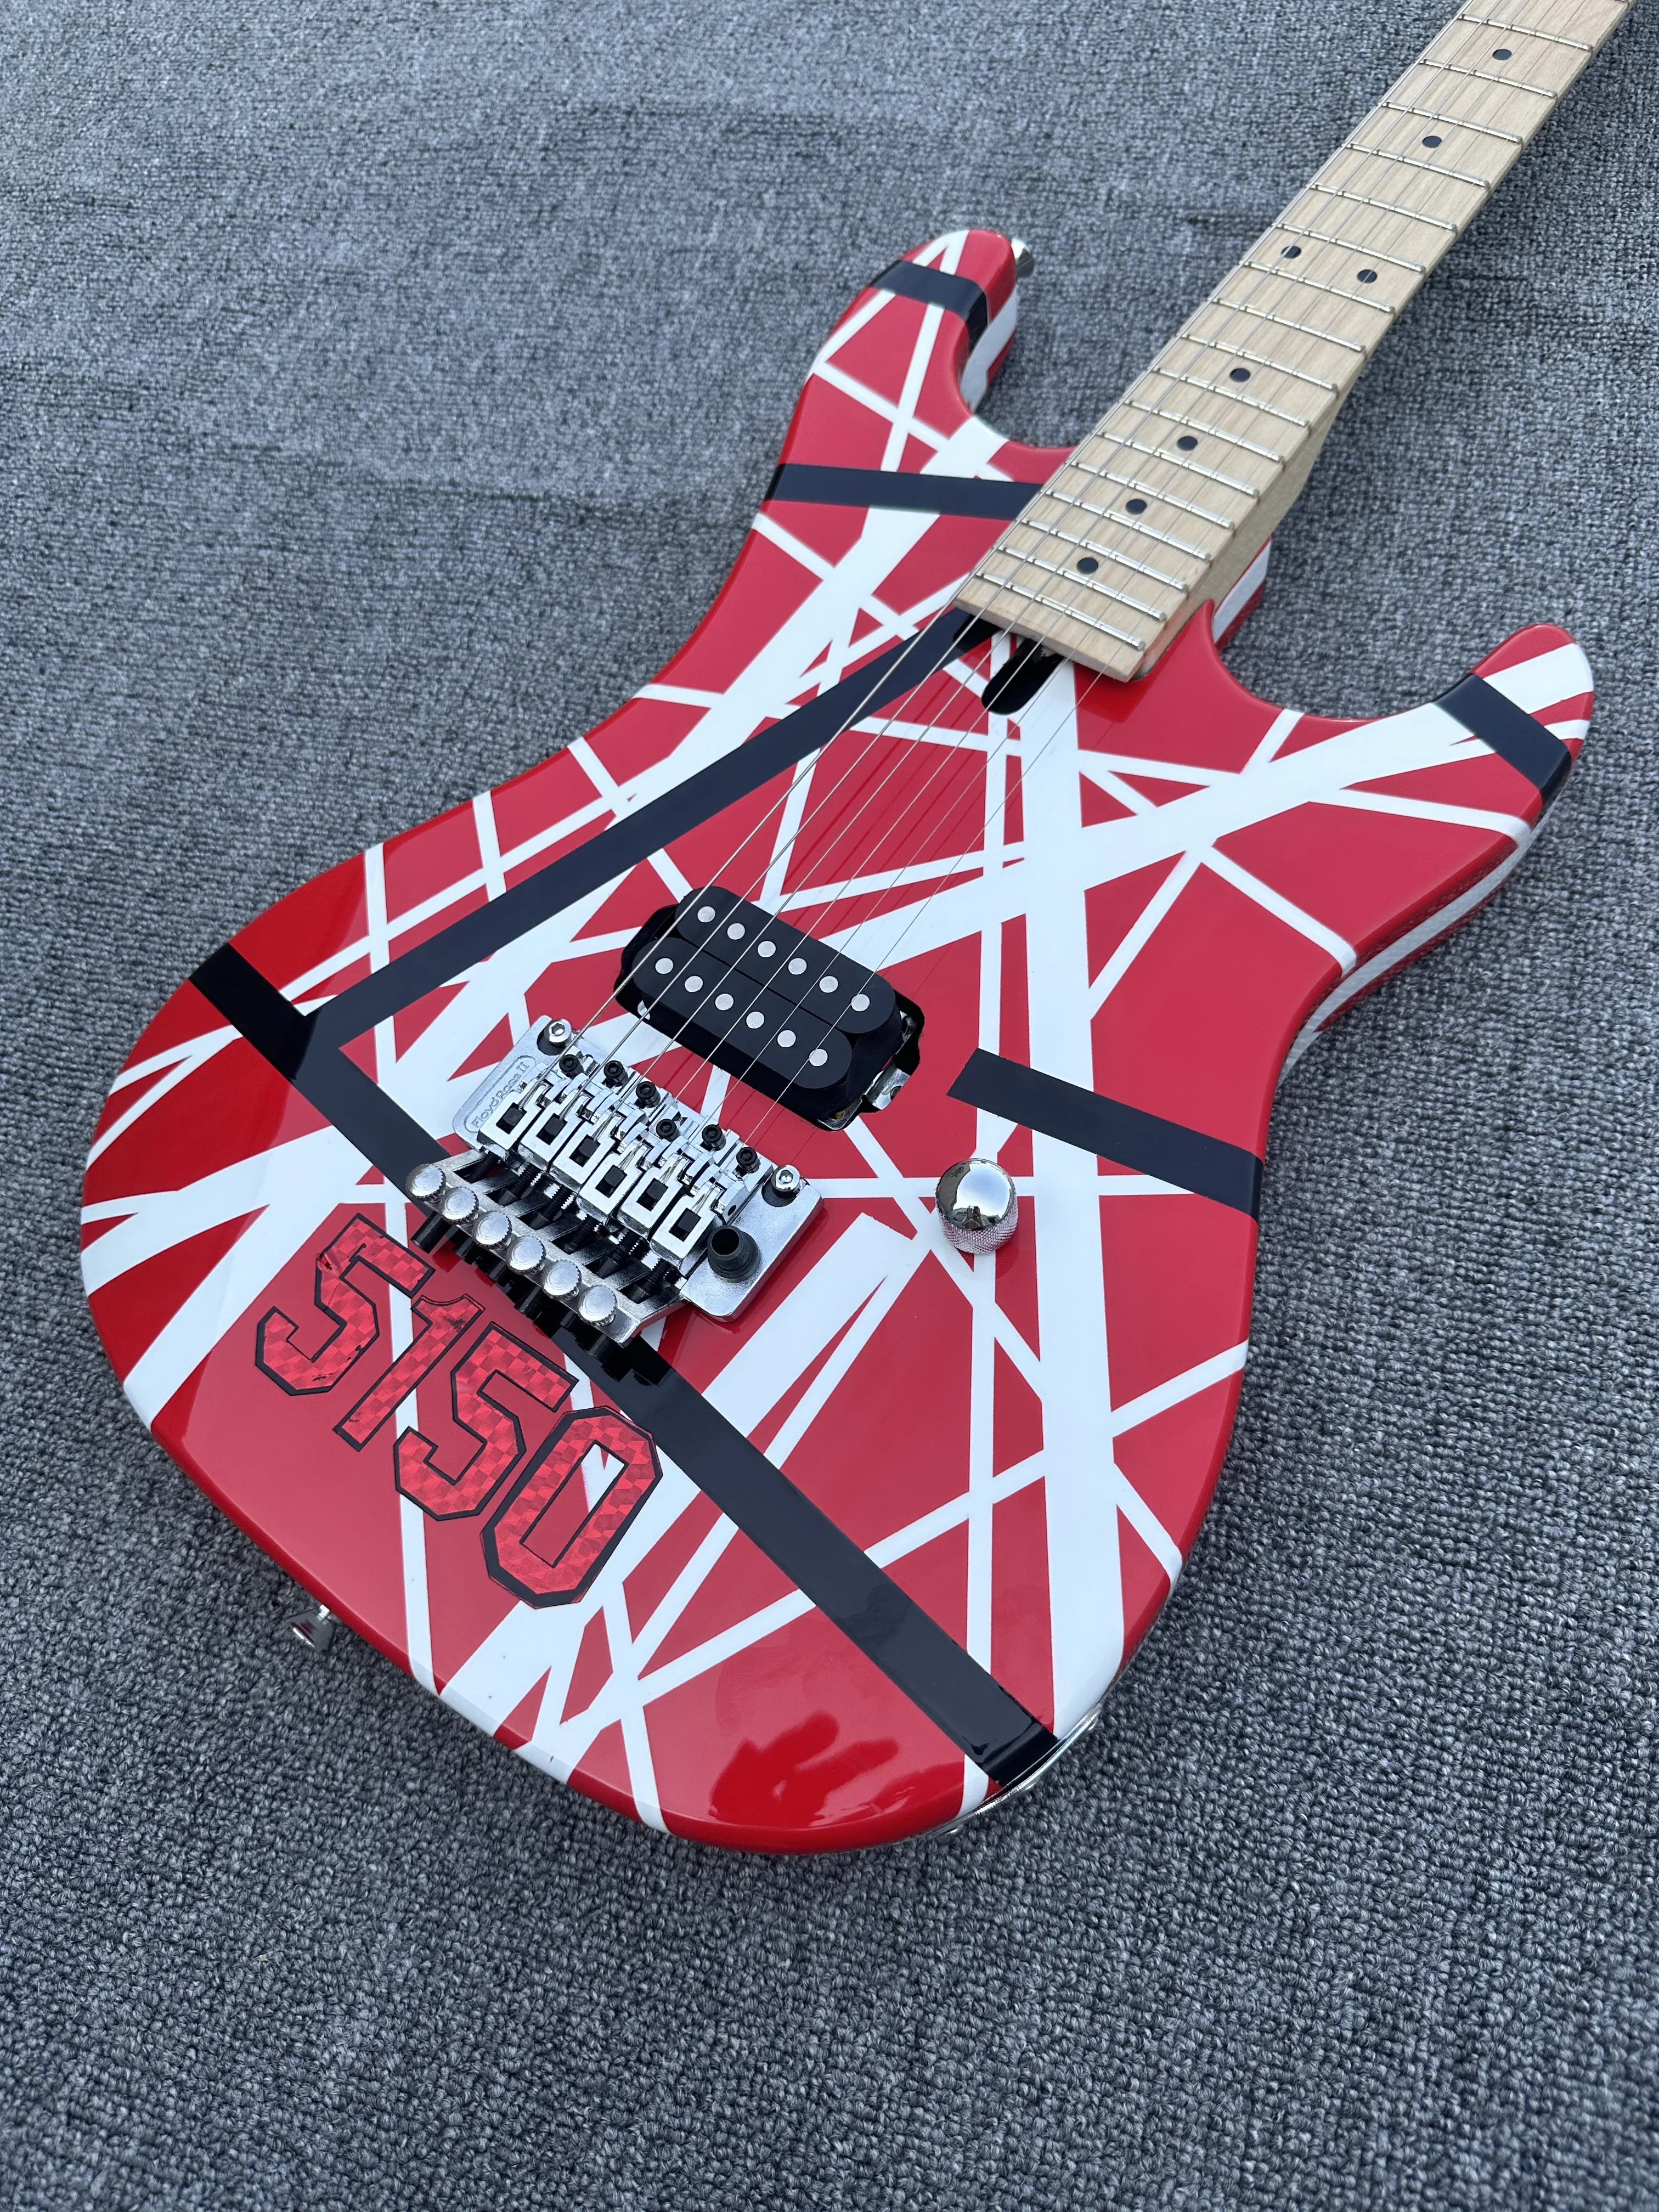 

Striped electric guitar, red and white stripes, alder body, Canadian maple sandwich neck and fingerboard, tremolo, in stock, qui